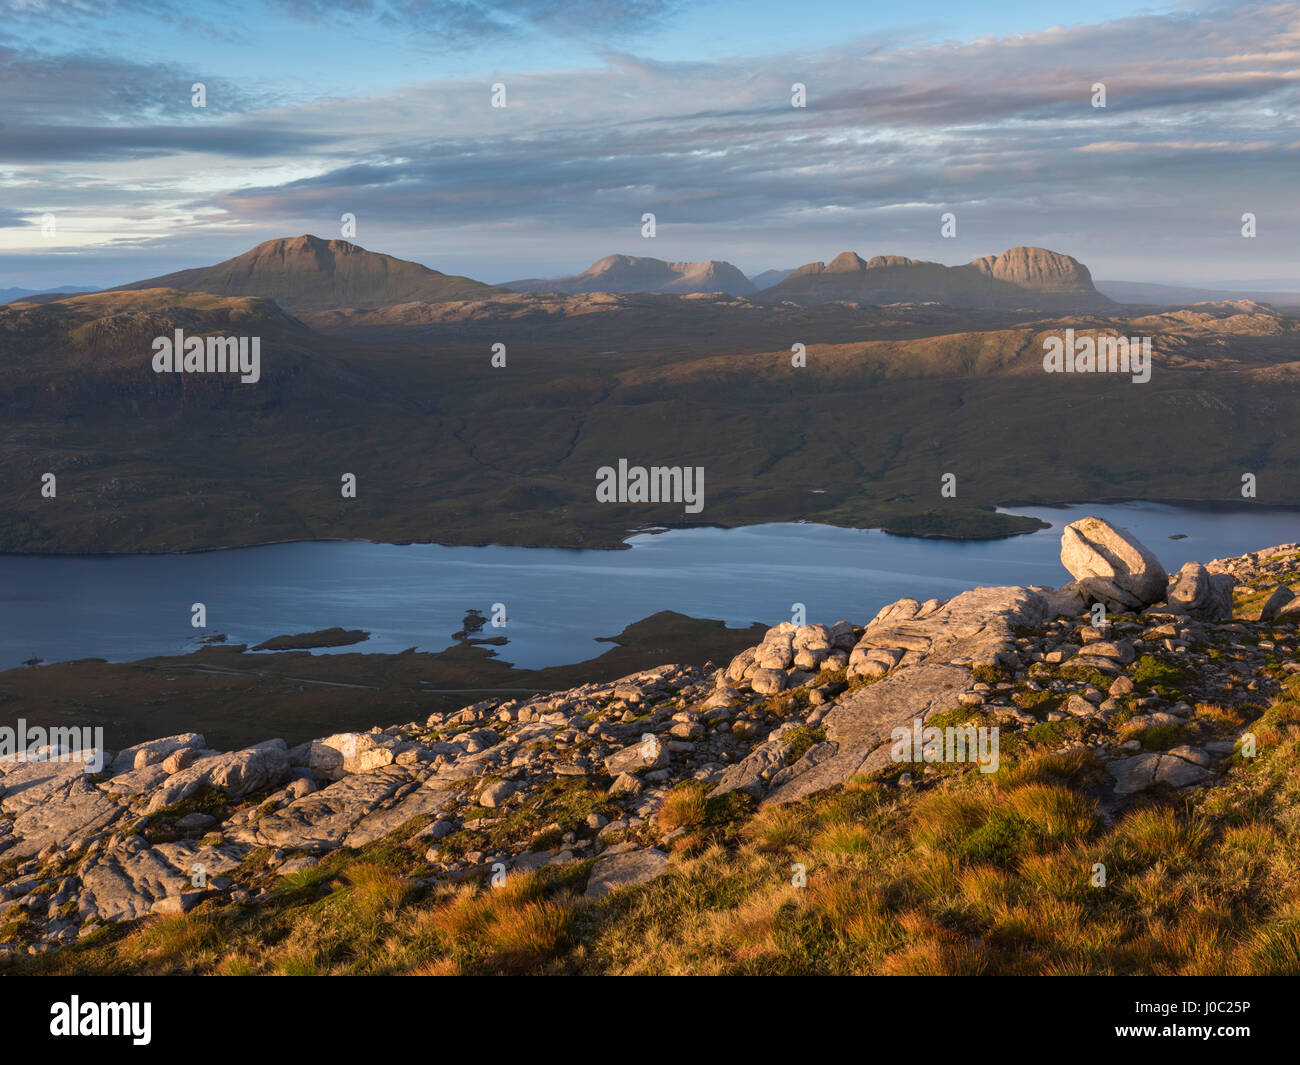 A view across to the mountains of Assynt from the slopes of Quinag, Sutherland, Highlands, Scotland, UK Stock Photo